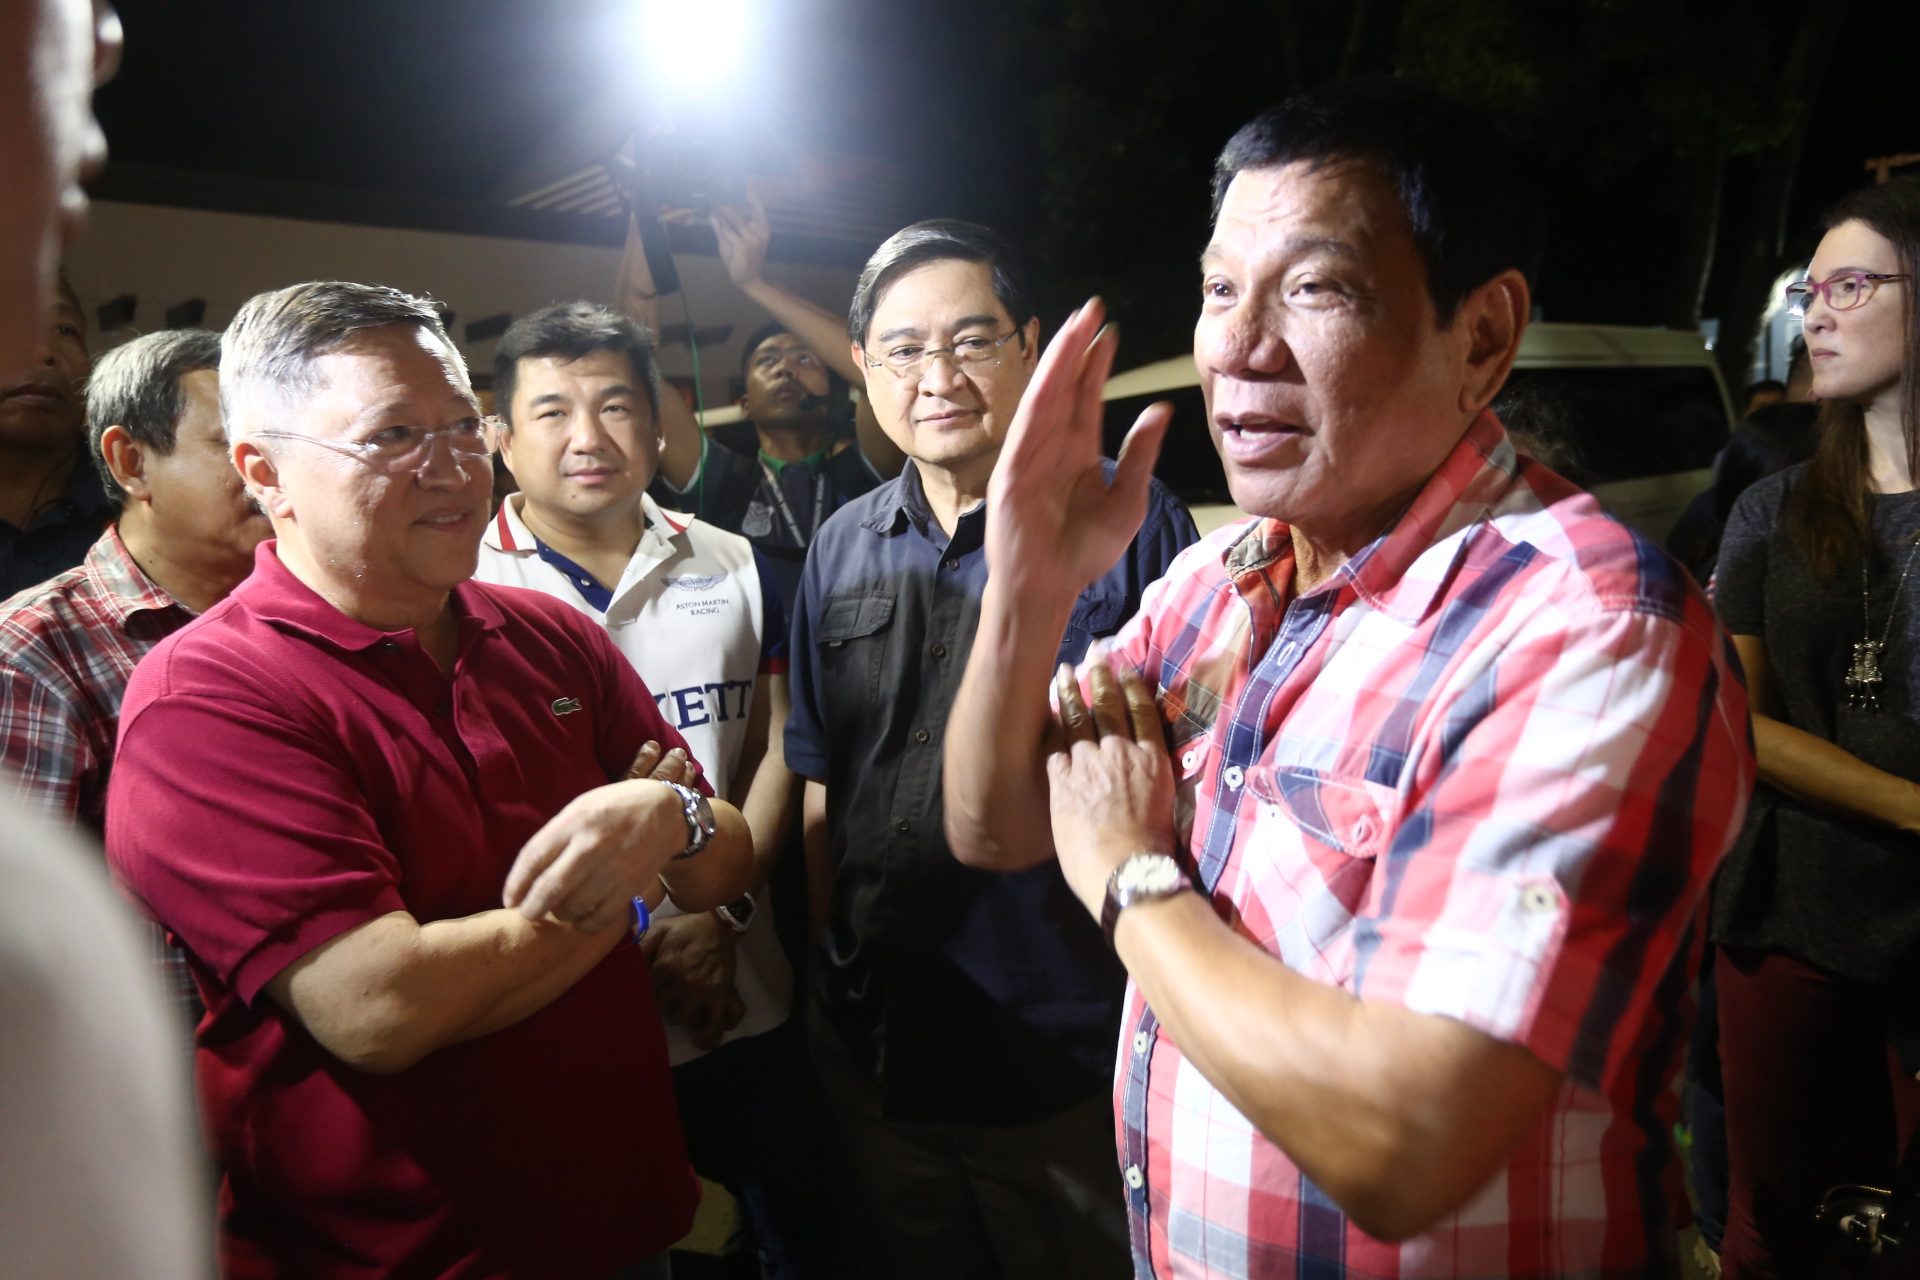 With Duterte win, global populism wave hits Philippines